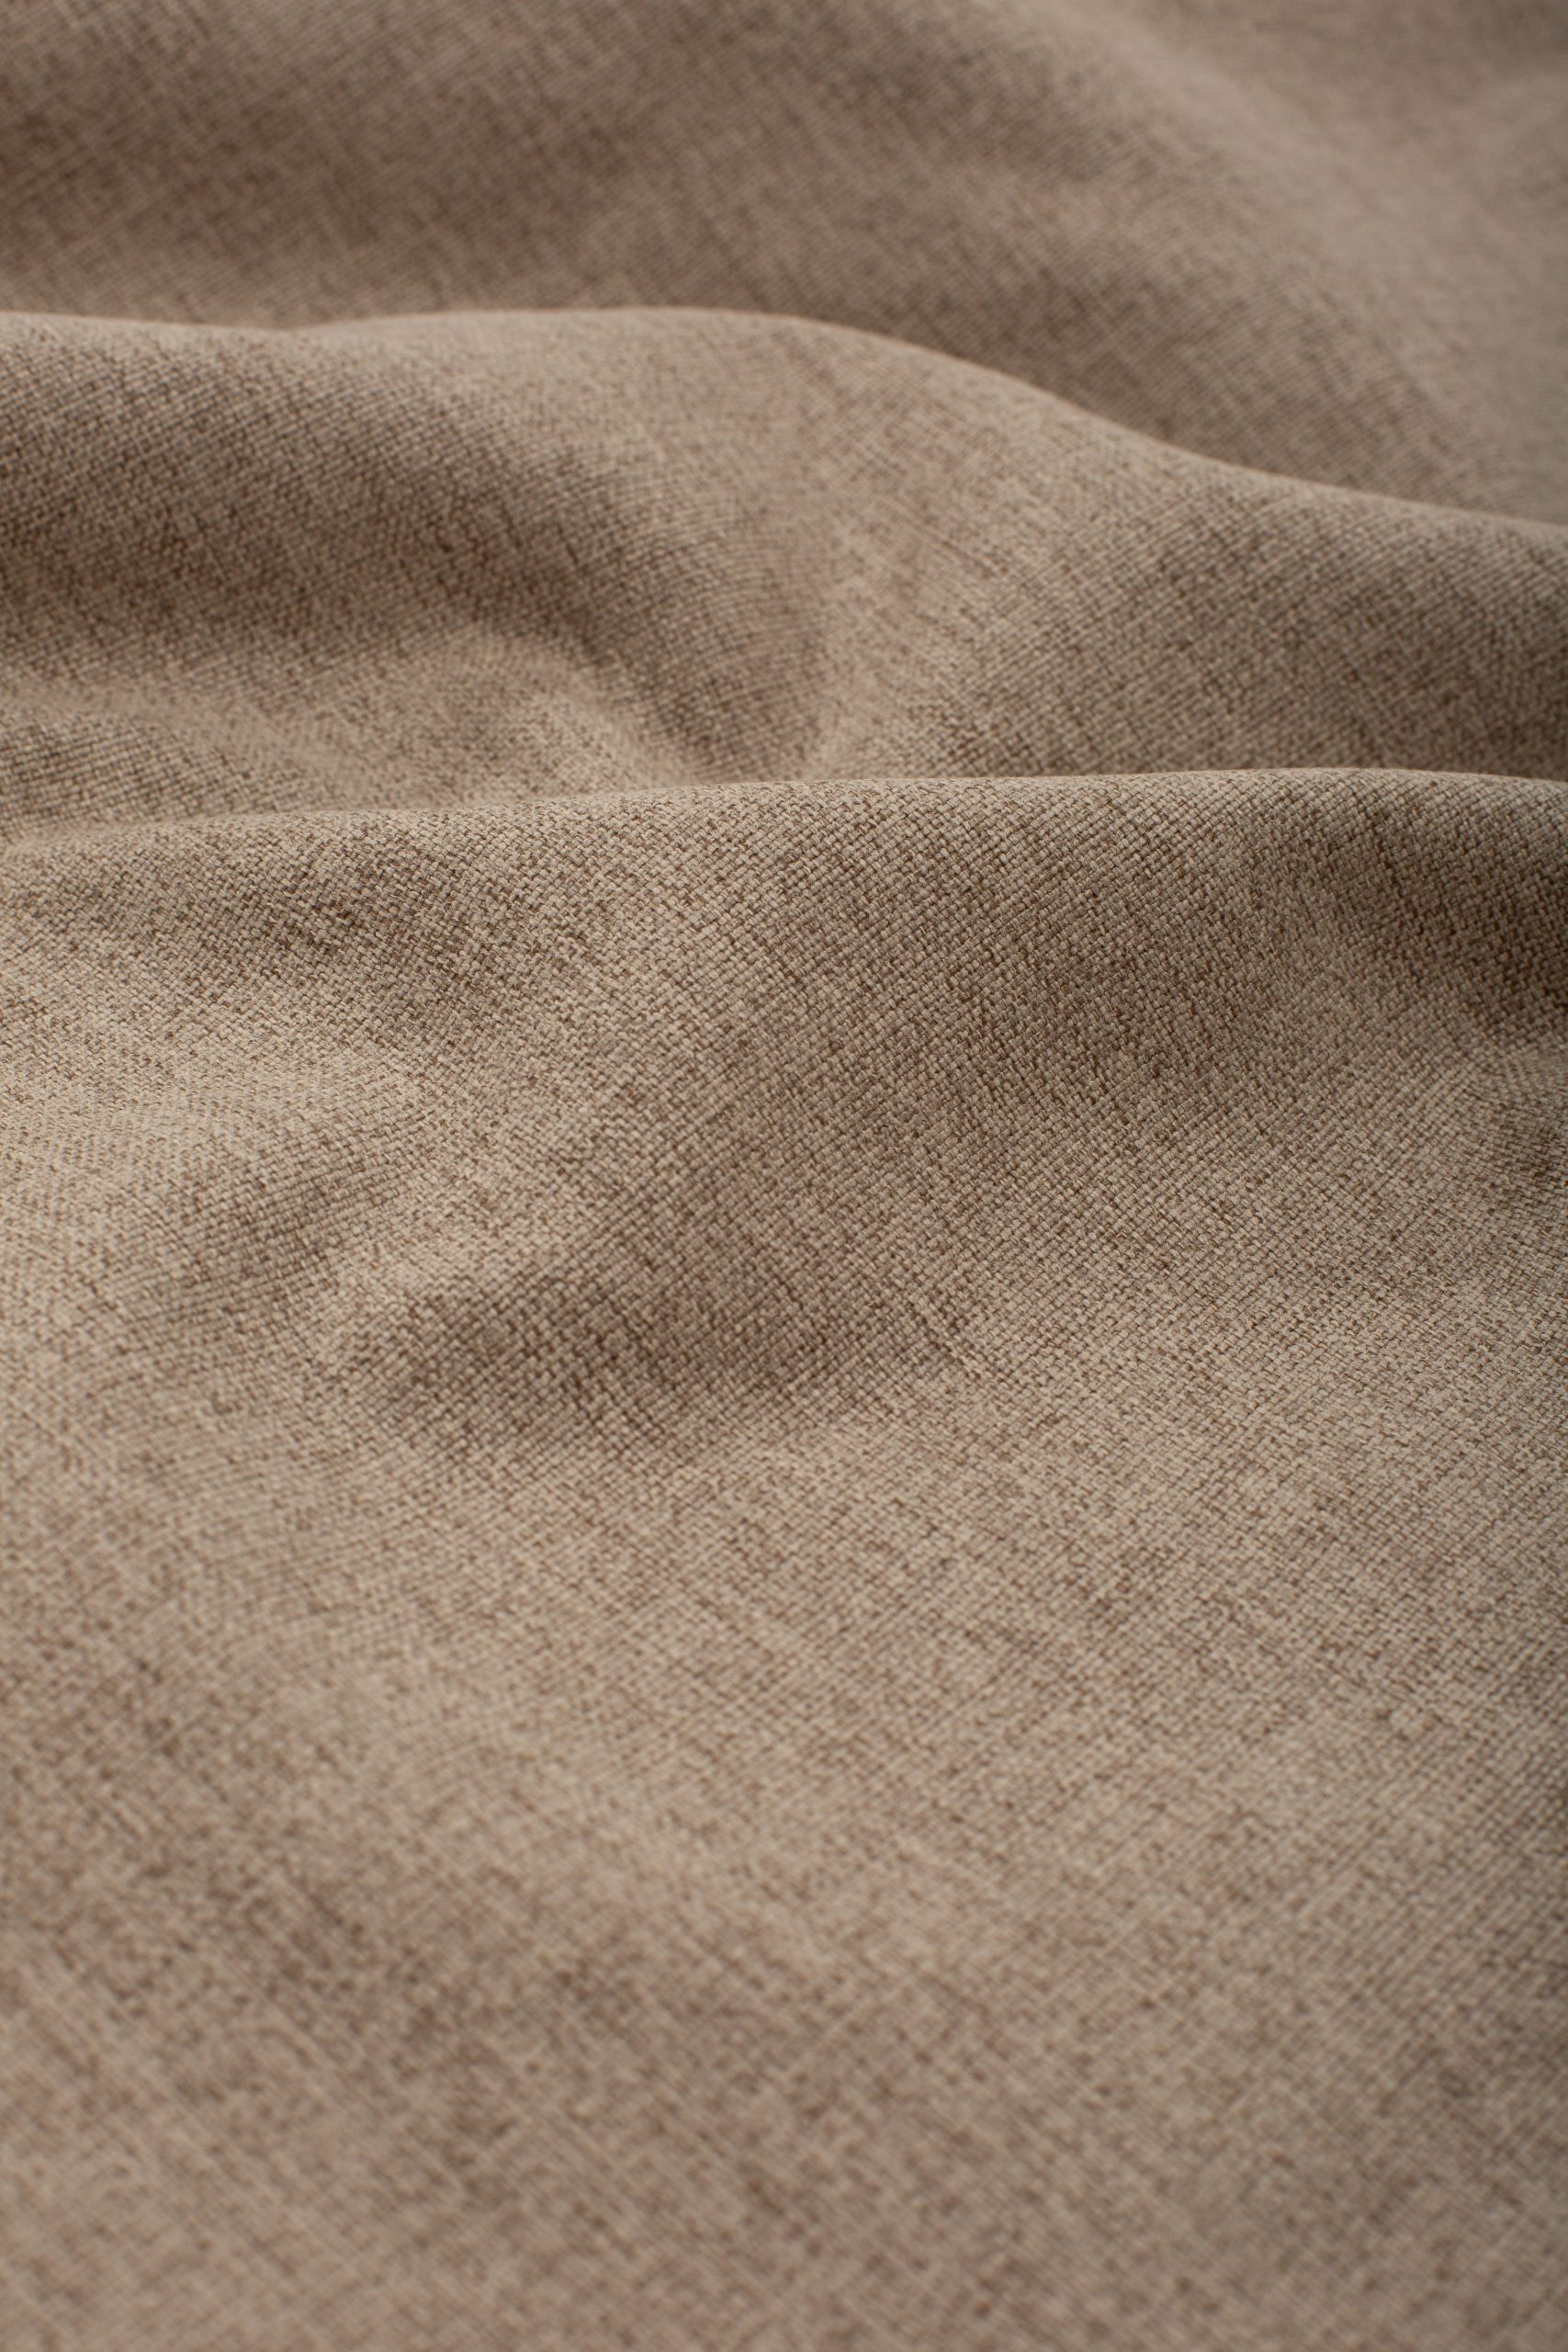 Relaxed Plains Homeboy Nougat Fabric